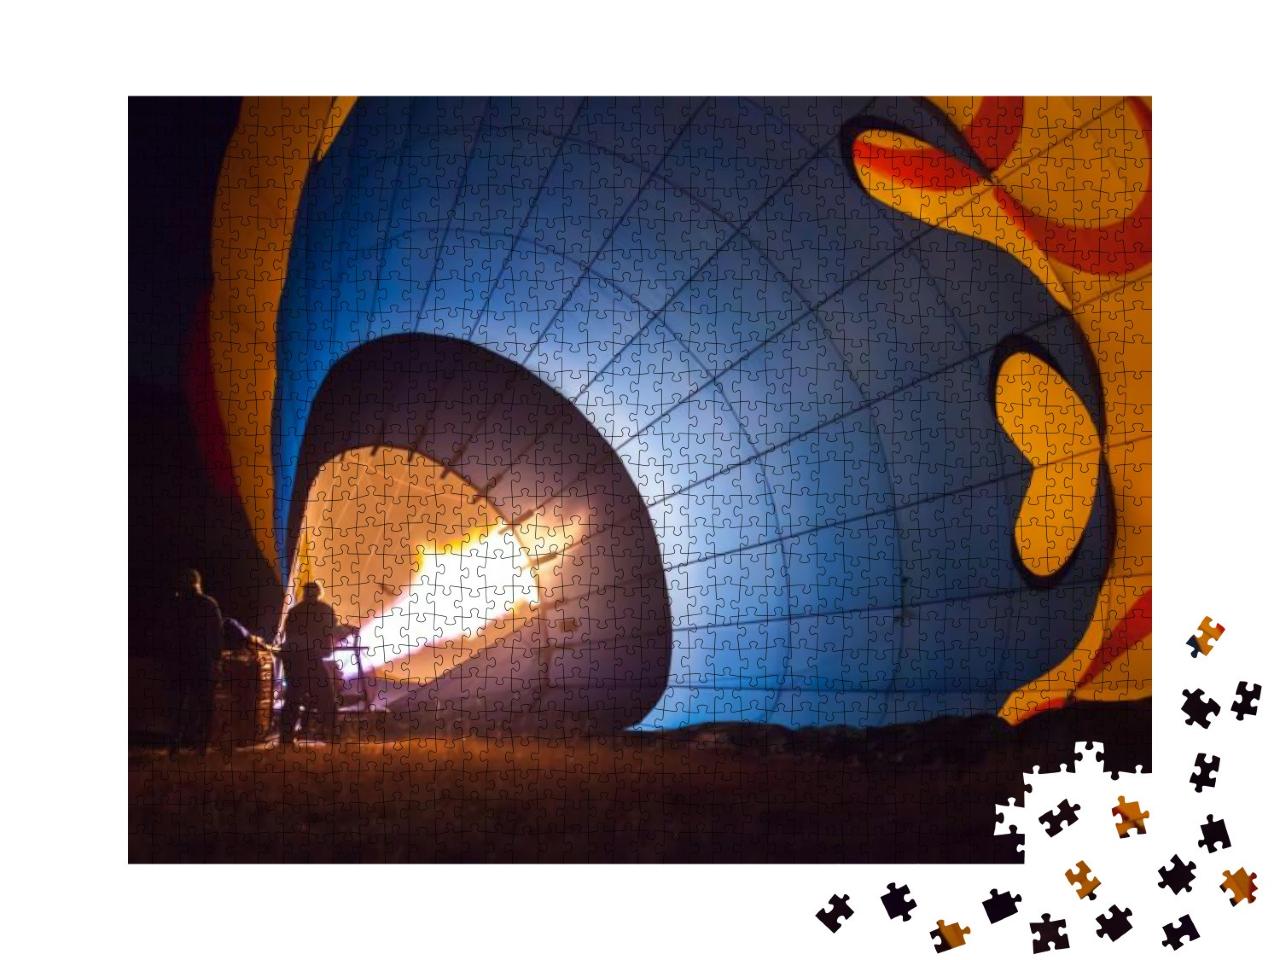 A Hot Air Balloon Being Hot Air Filled with Flames Before... Jigsaw Puzzle with 1000 pieces